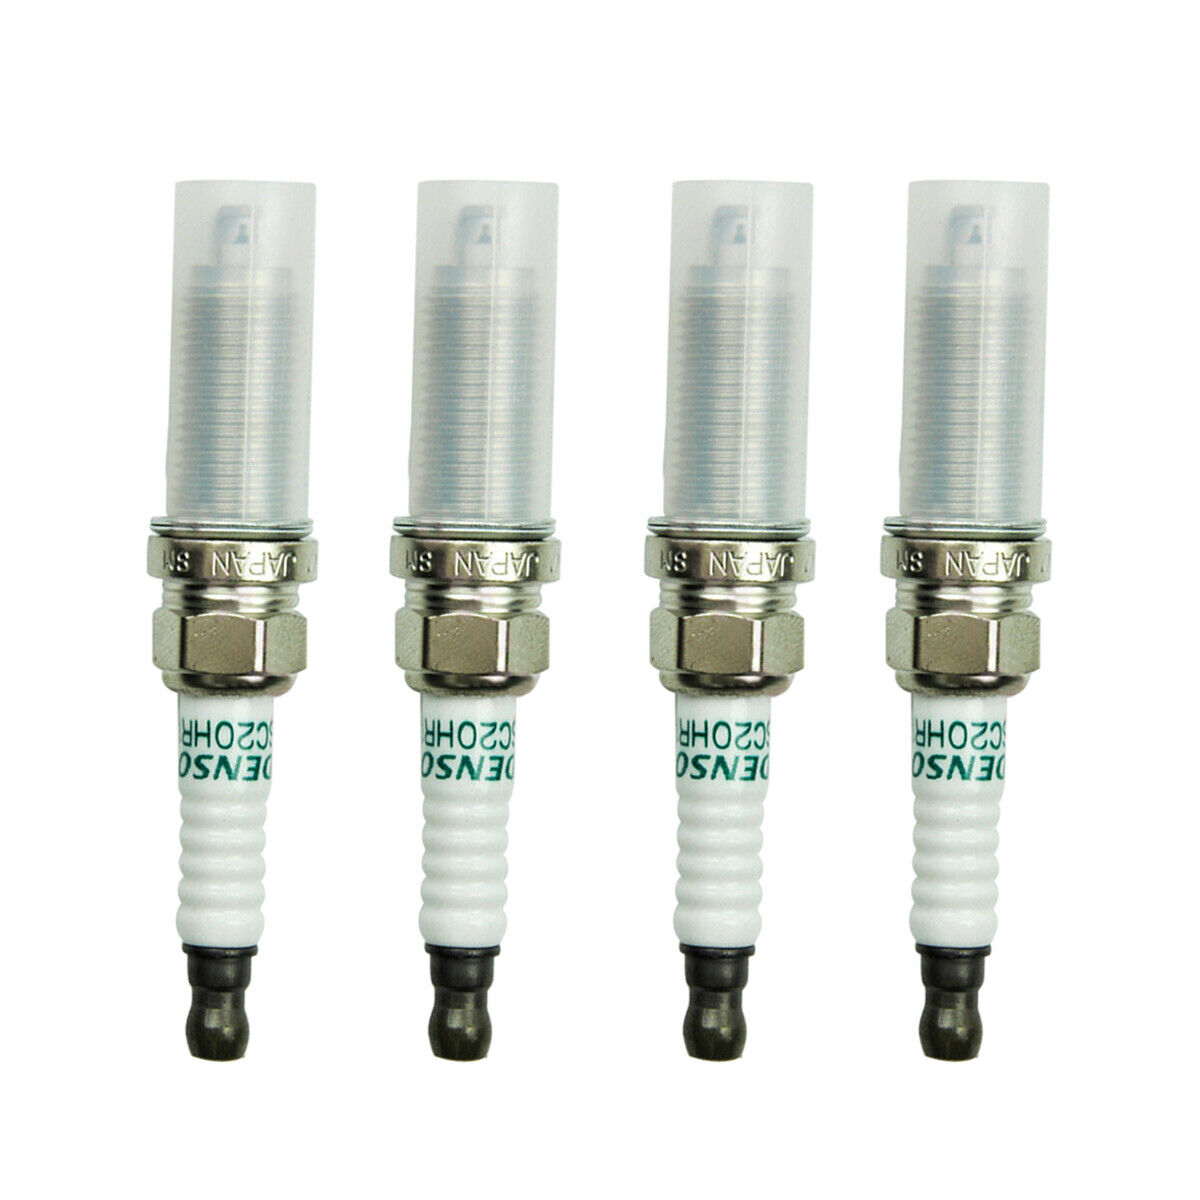 Pack of 4 TOYOTA 90919-01253 DENSO SC20HR11 3444 Spark Plugs For Toyota Lexus